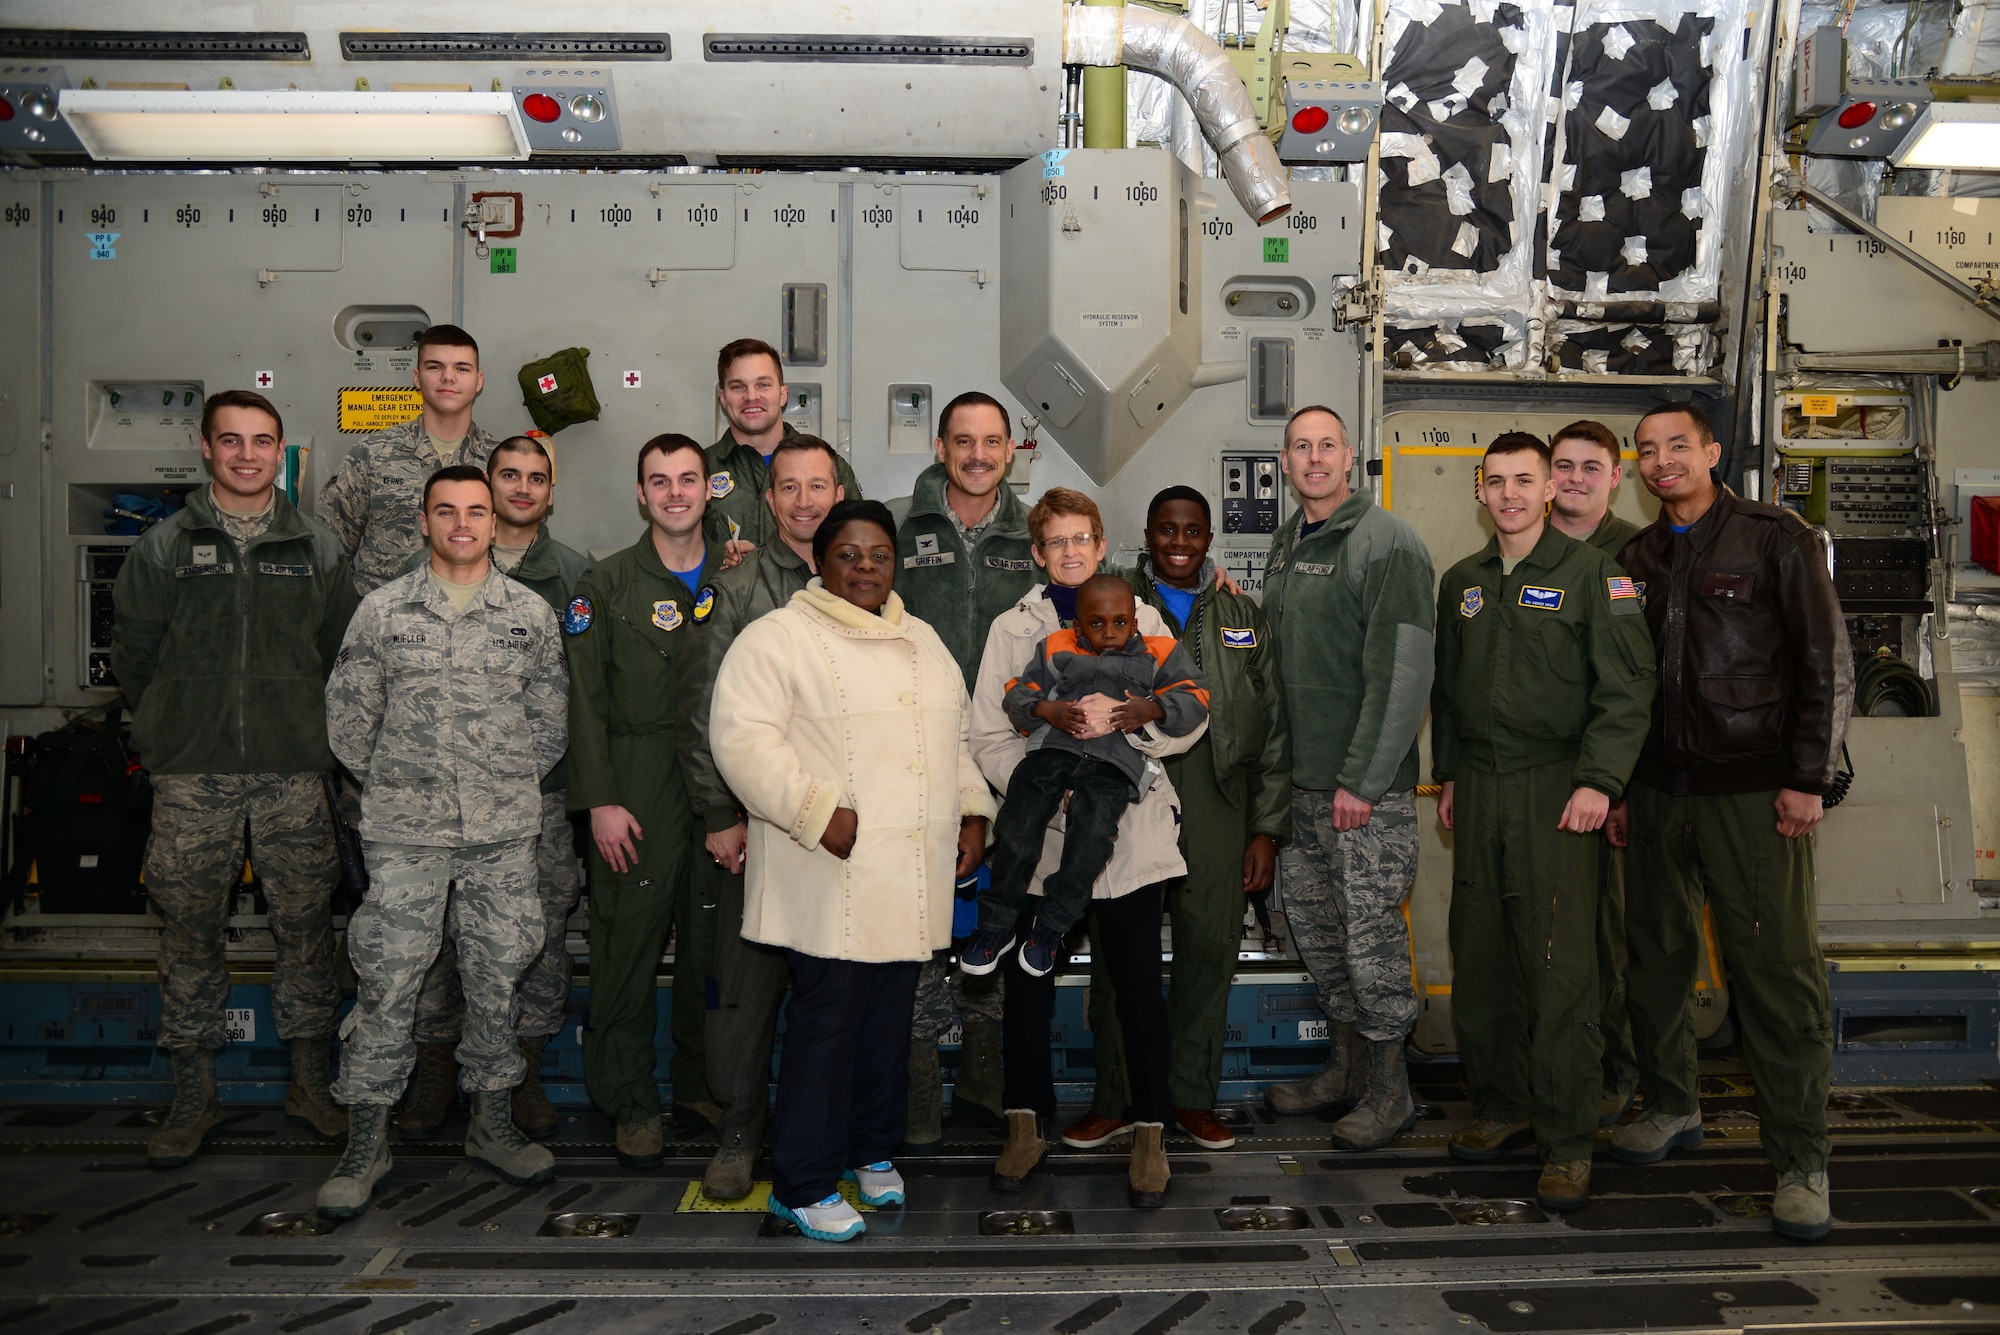 A group of members assigned to Dover Air Force Base, Del., and Holloman AFB, N.M., stand with Kareem Bennett (center) and his family on the deck of a C-17 Globemaster III March 16, 2018, at Dover AFB. Bennett was invited by the 3rd Airlift Squadron to participate in their honorary Pilot for a Day program, where he saw a behind-the-scenes view of the day-to-day mission of the Airmen of various military careers. (U.S. Air Force photo by Staff Sgt. Aaron J. Jenne)